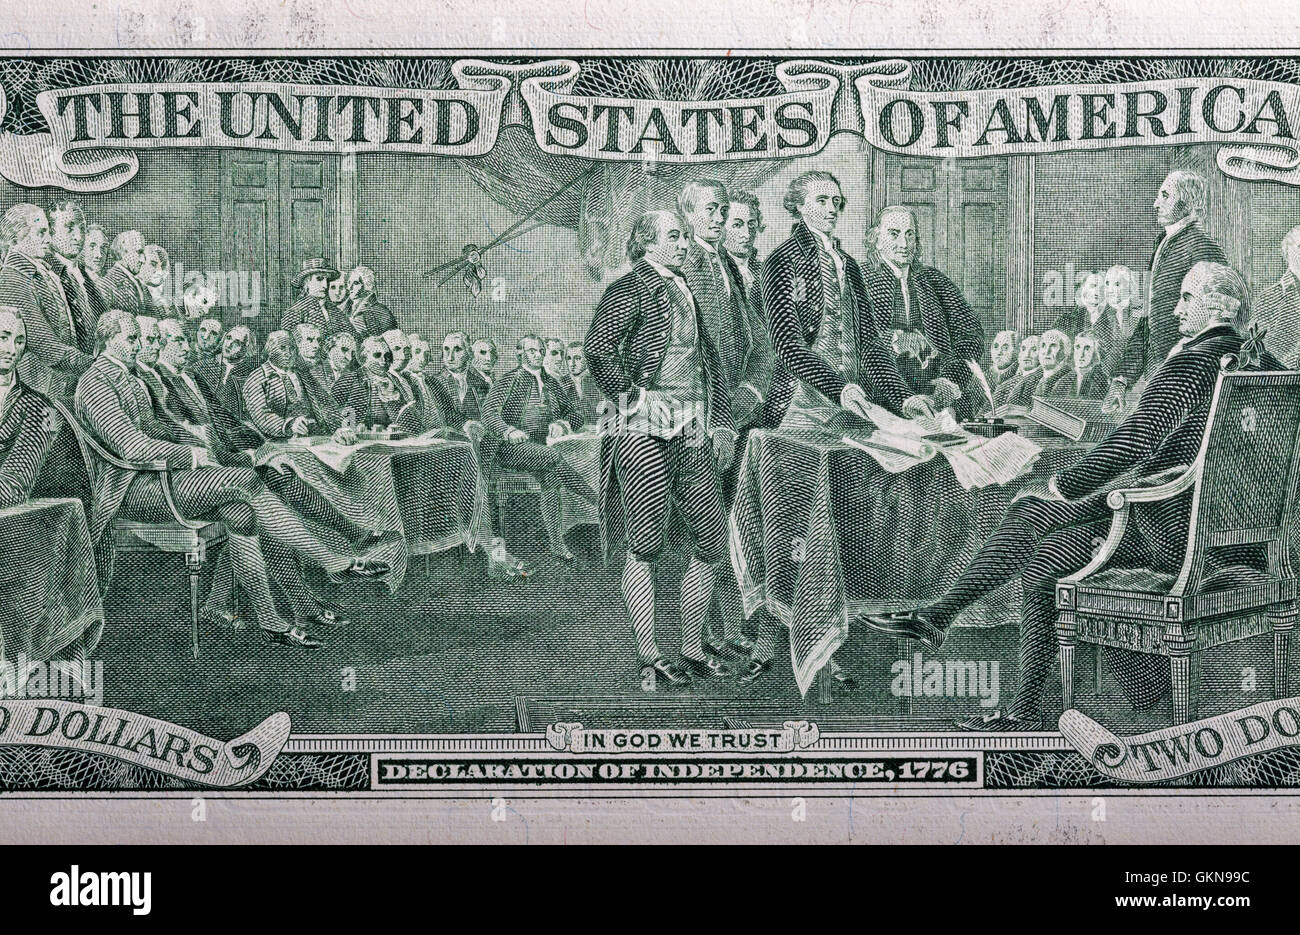 Declaration of independence, 1776 on the back of a two dollar bill closeup Stock Photo